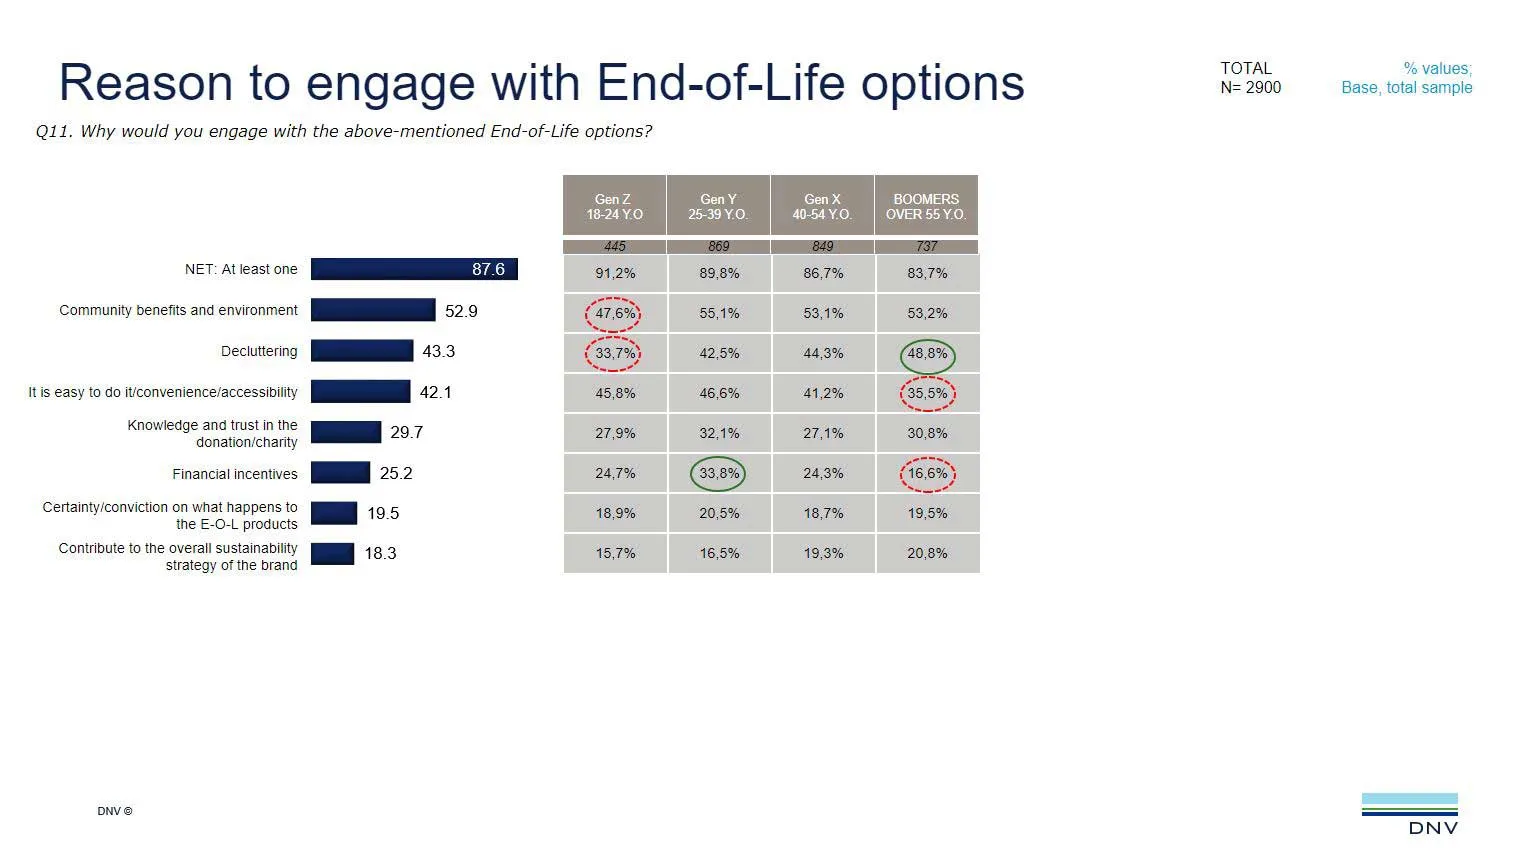 Reason to engage with End-of-Life options